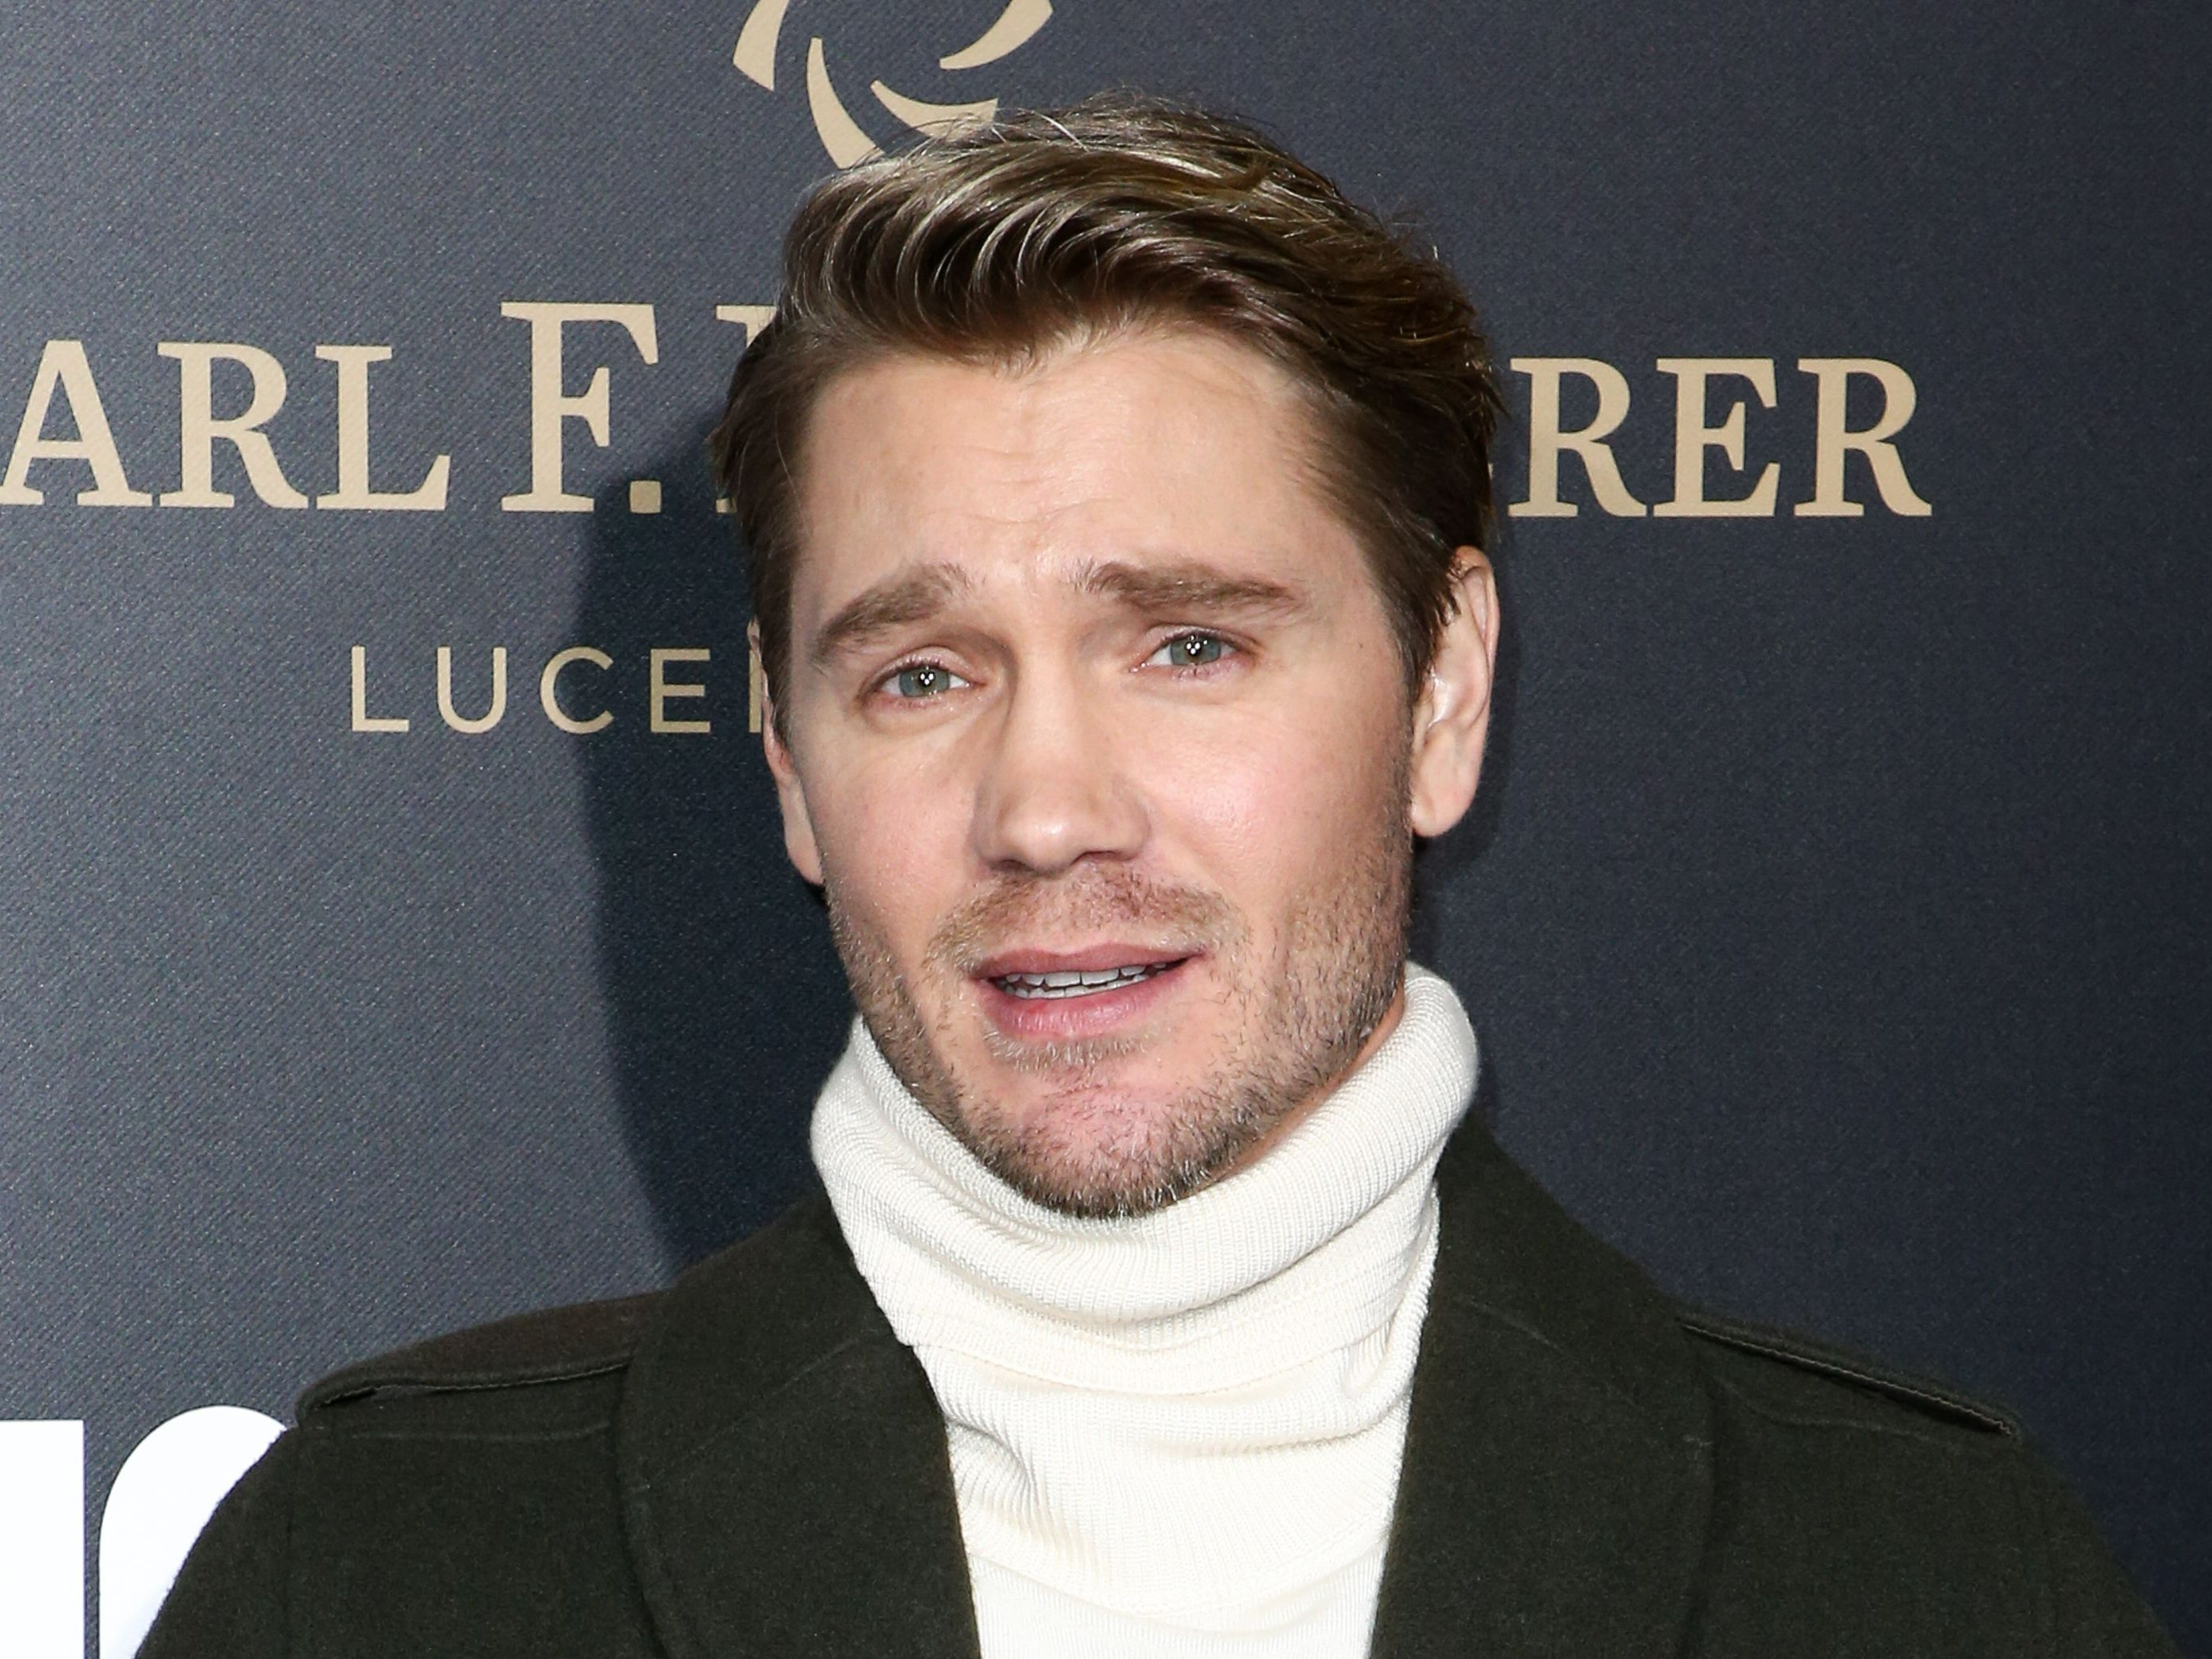 Chad Michael Murray has said he experienced panic attacks and agoraphobia at the height of his career